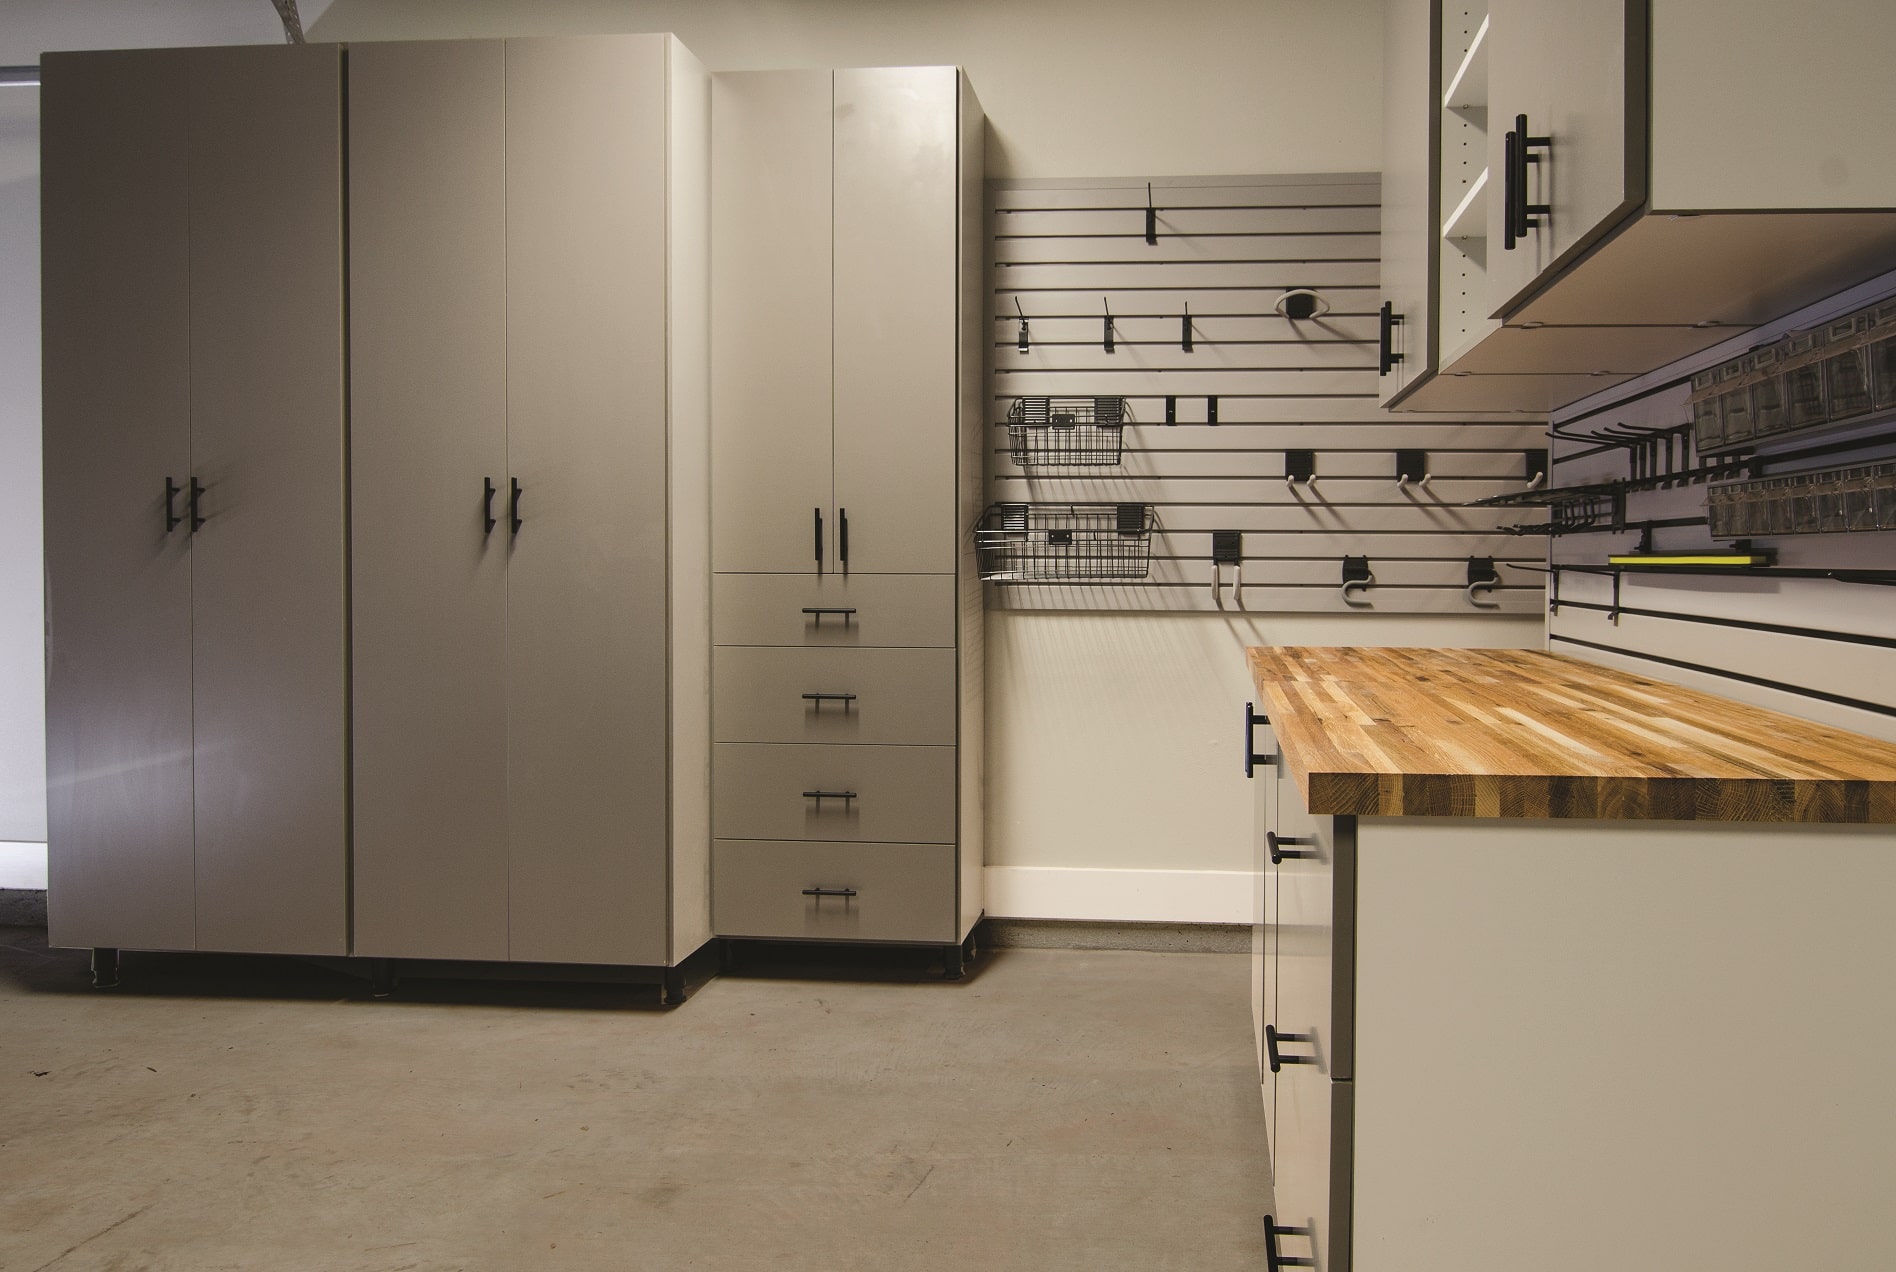 A clean, orderly garage with cabinetry and a workbench